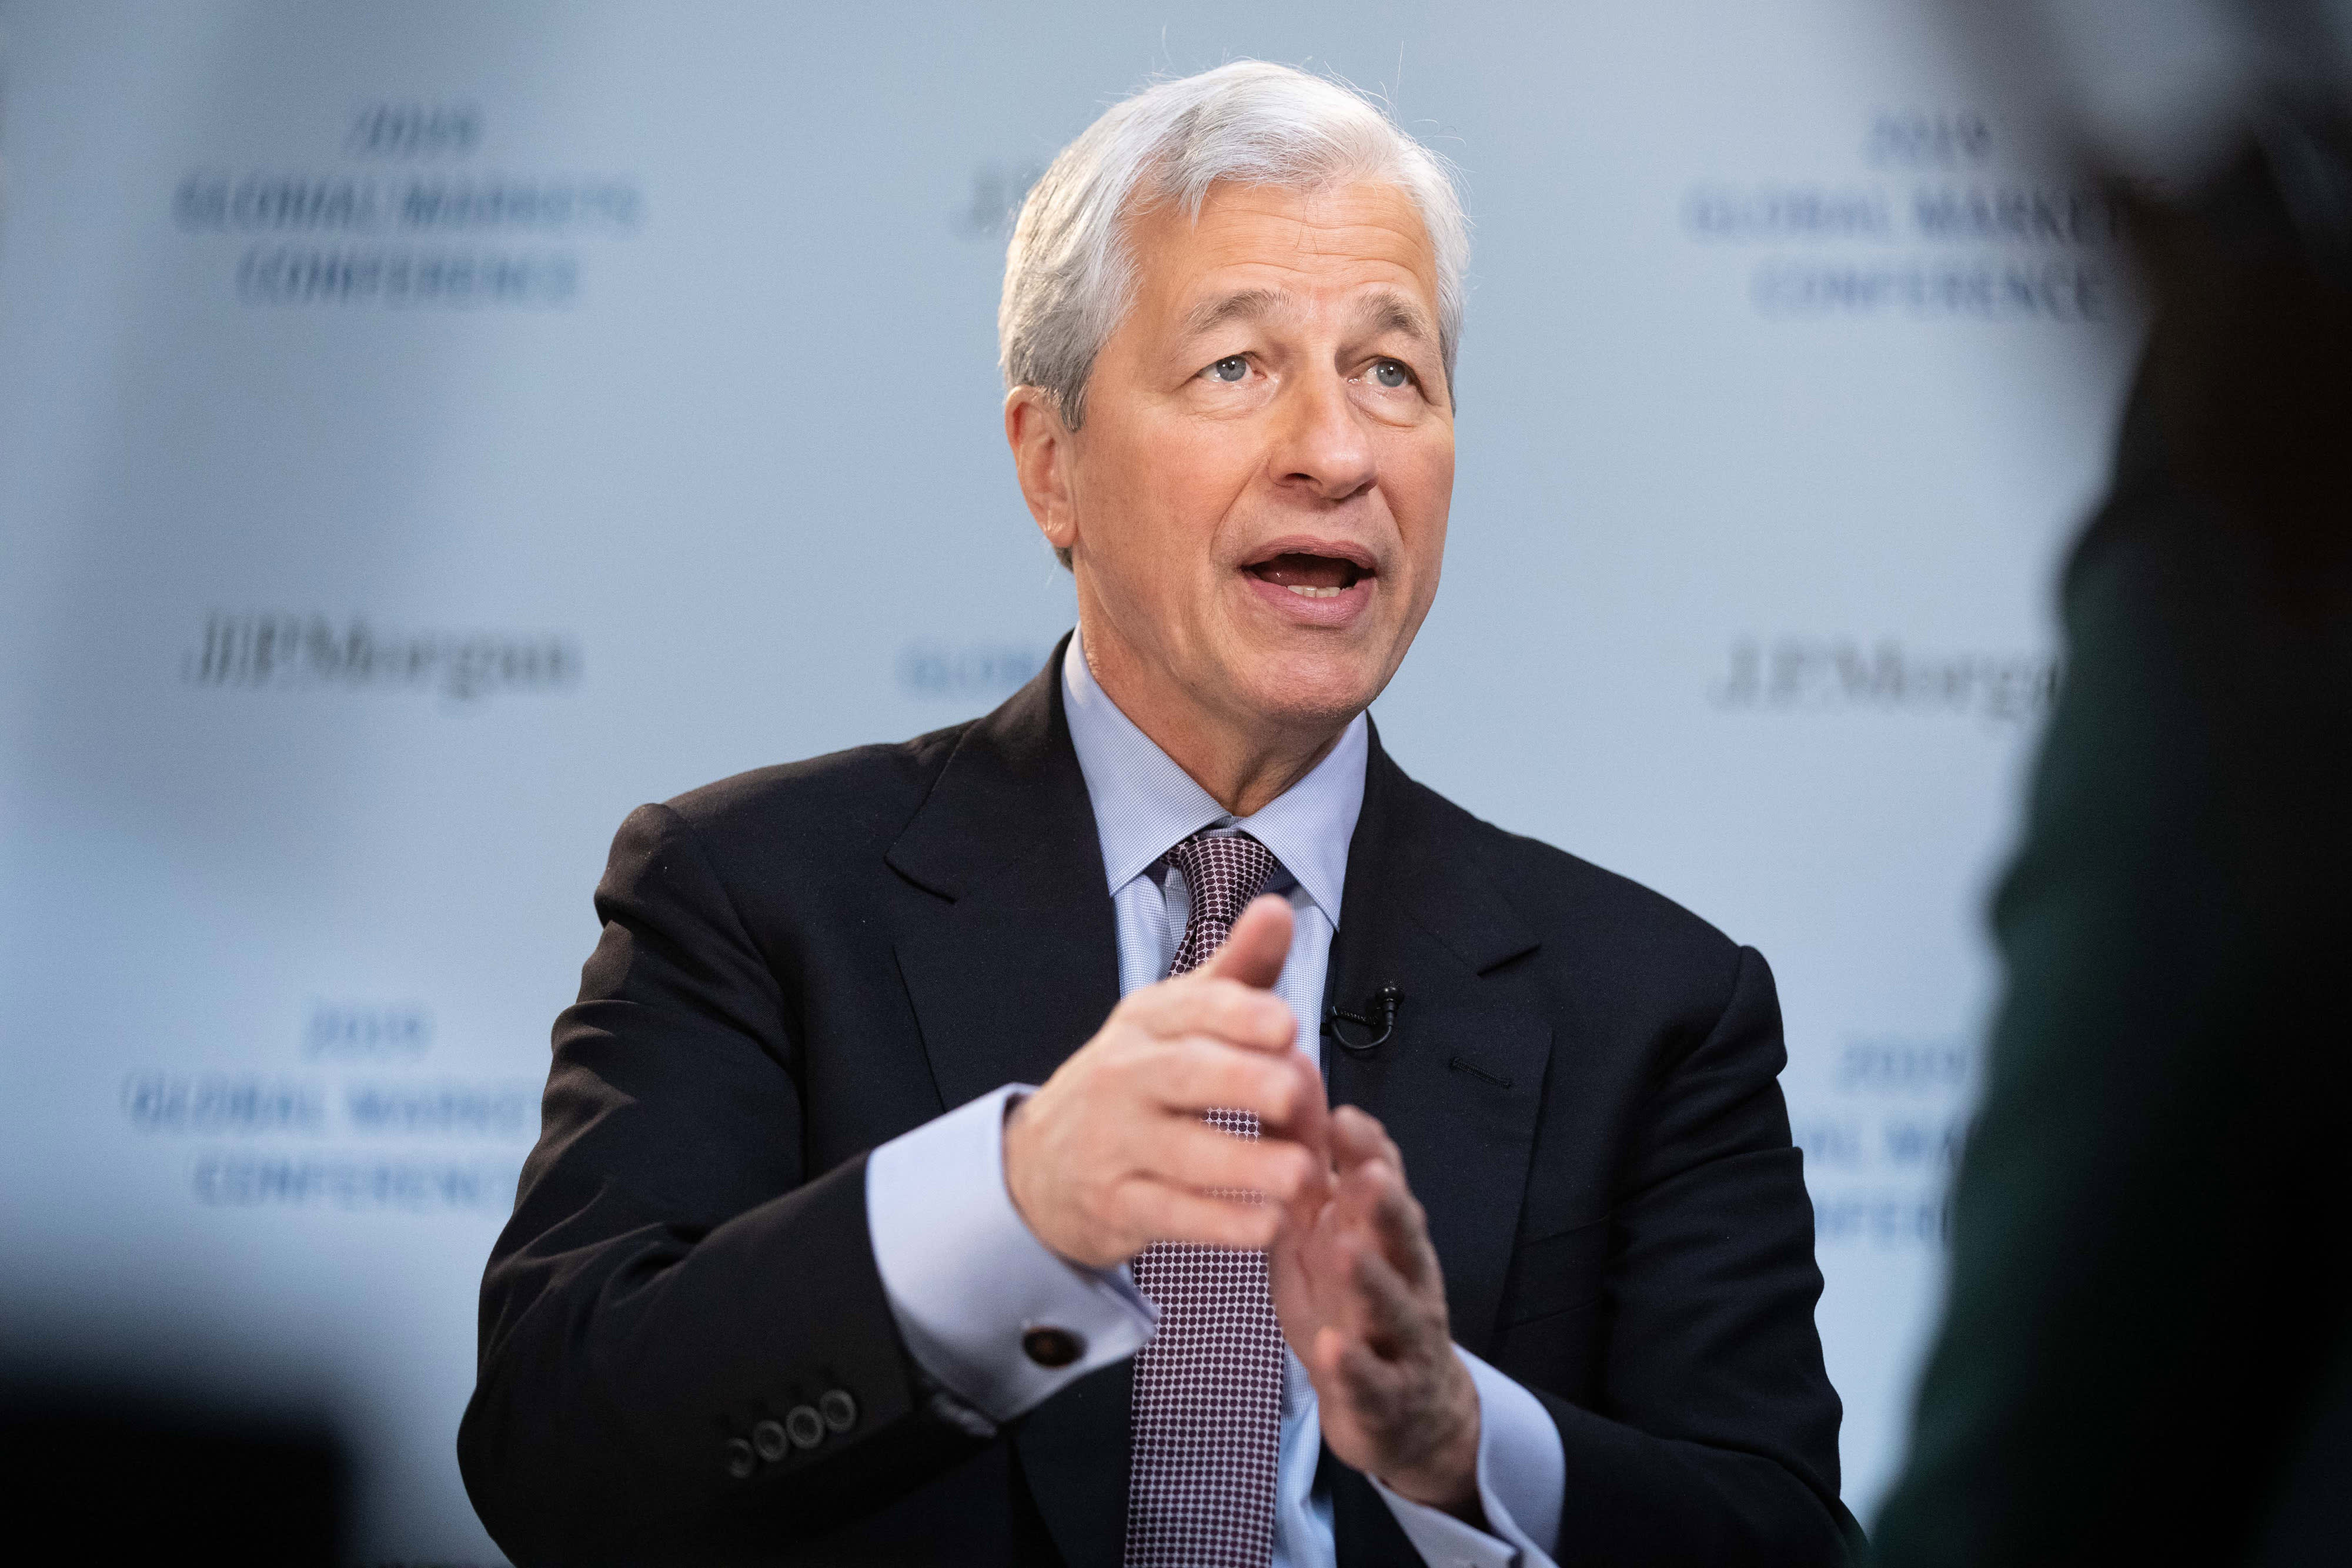 JPMorgan Chase CEO Jamie Dimon: Fintech is an 'enormous competitive' threat to banks